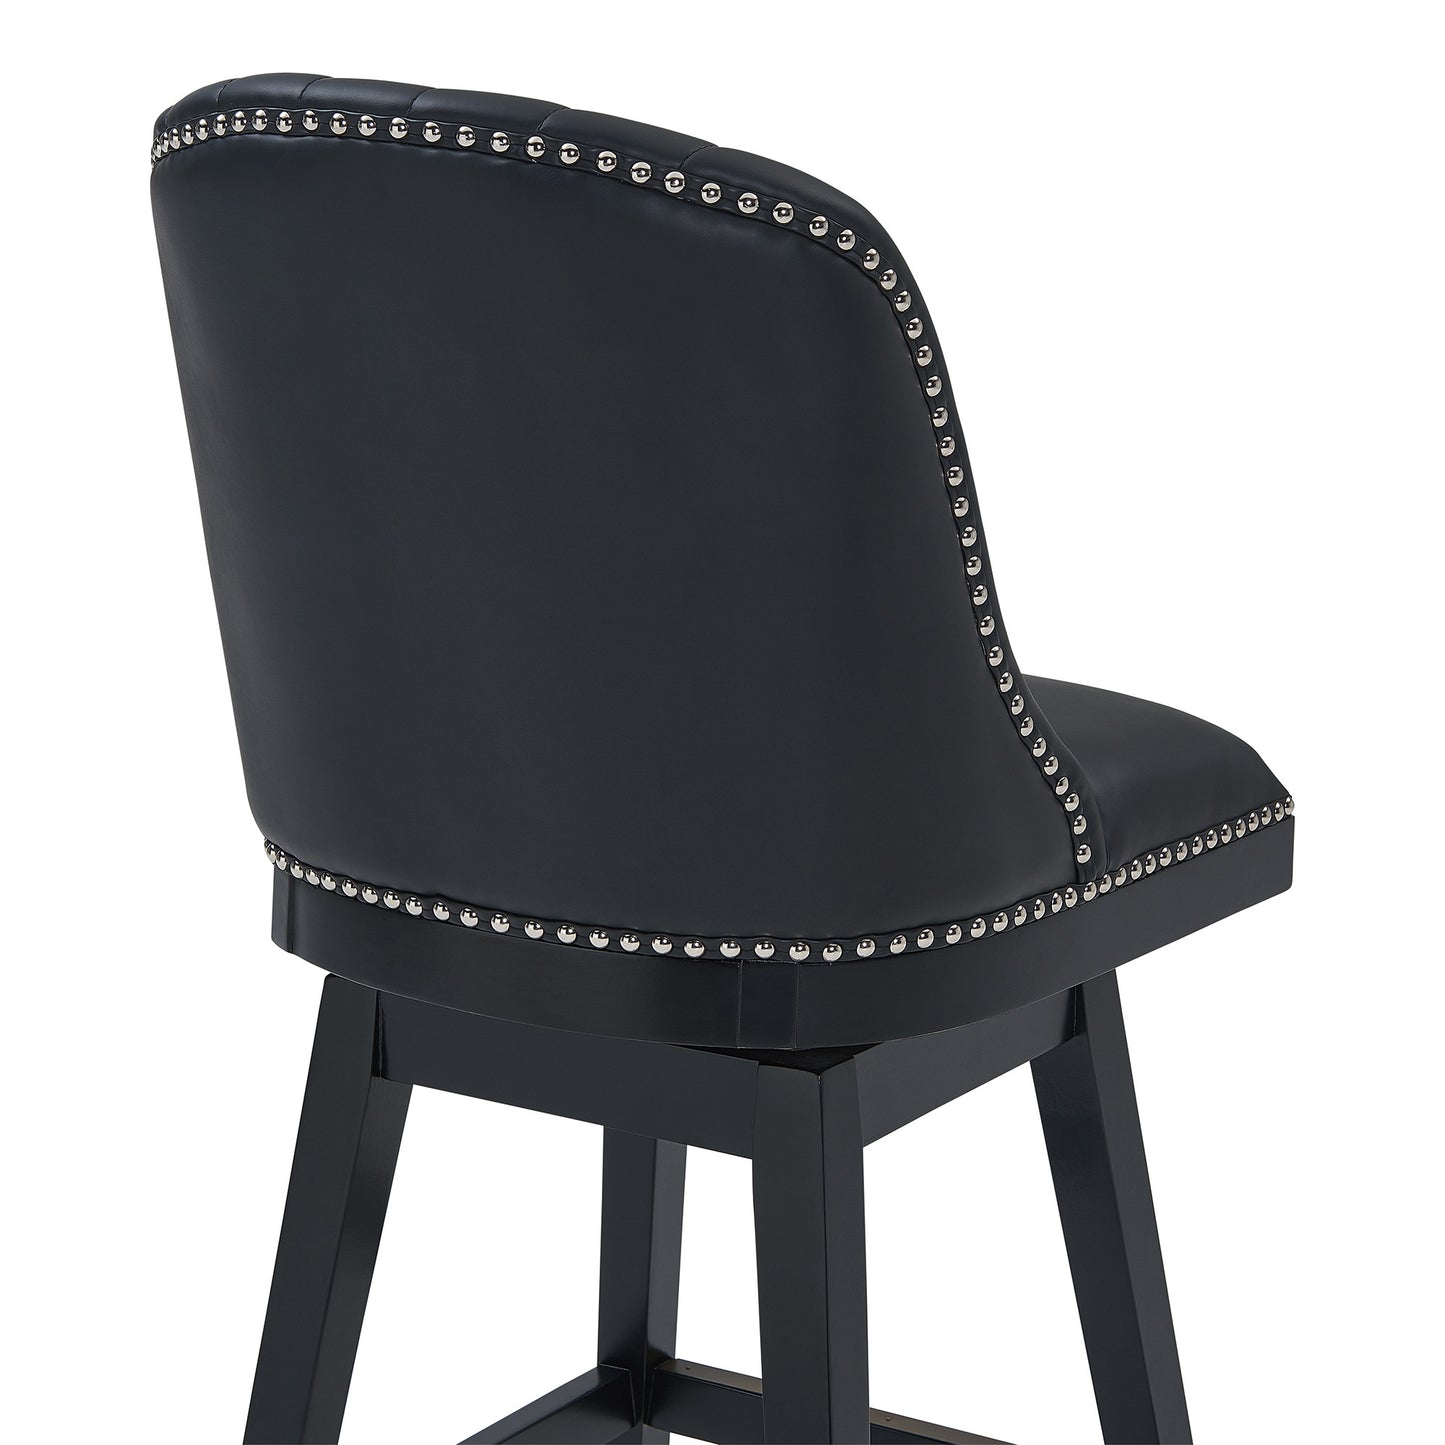 42" Black Faux Leather And Solid Wood Swivel Bar Height Chair By Homeroots